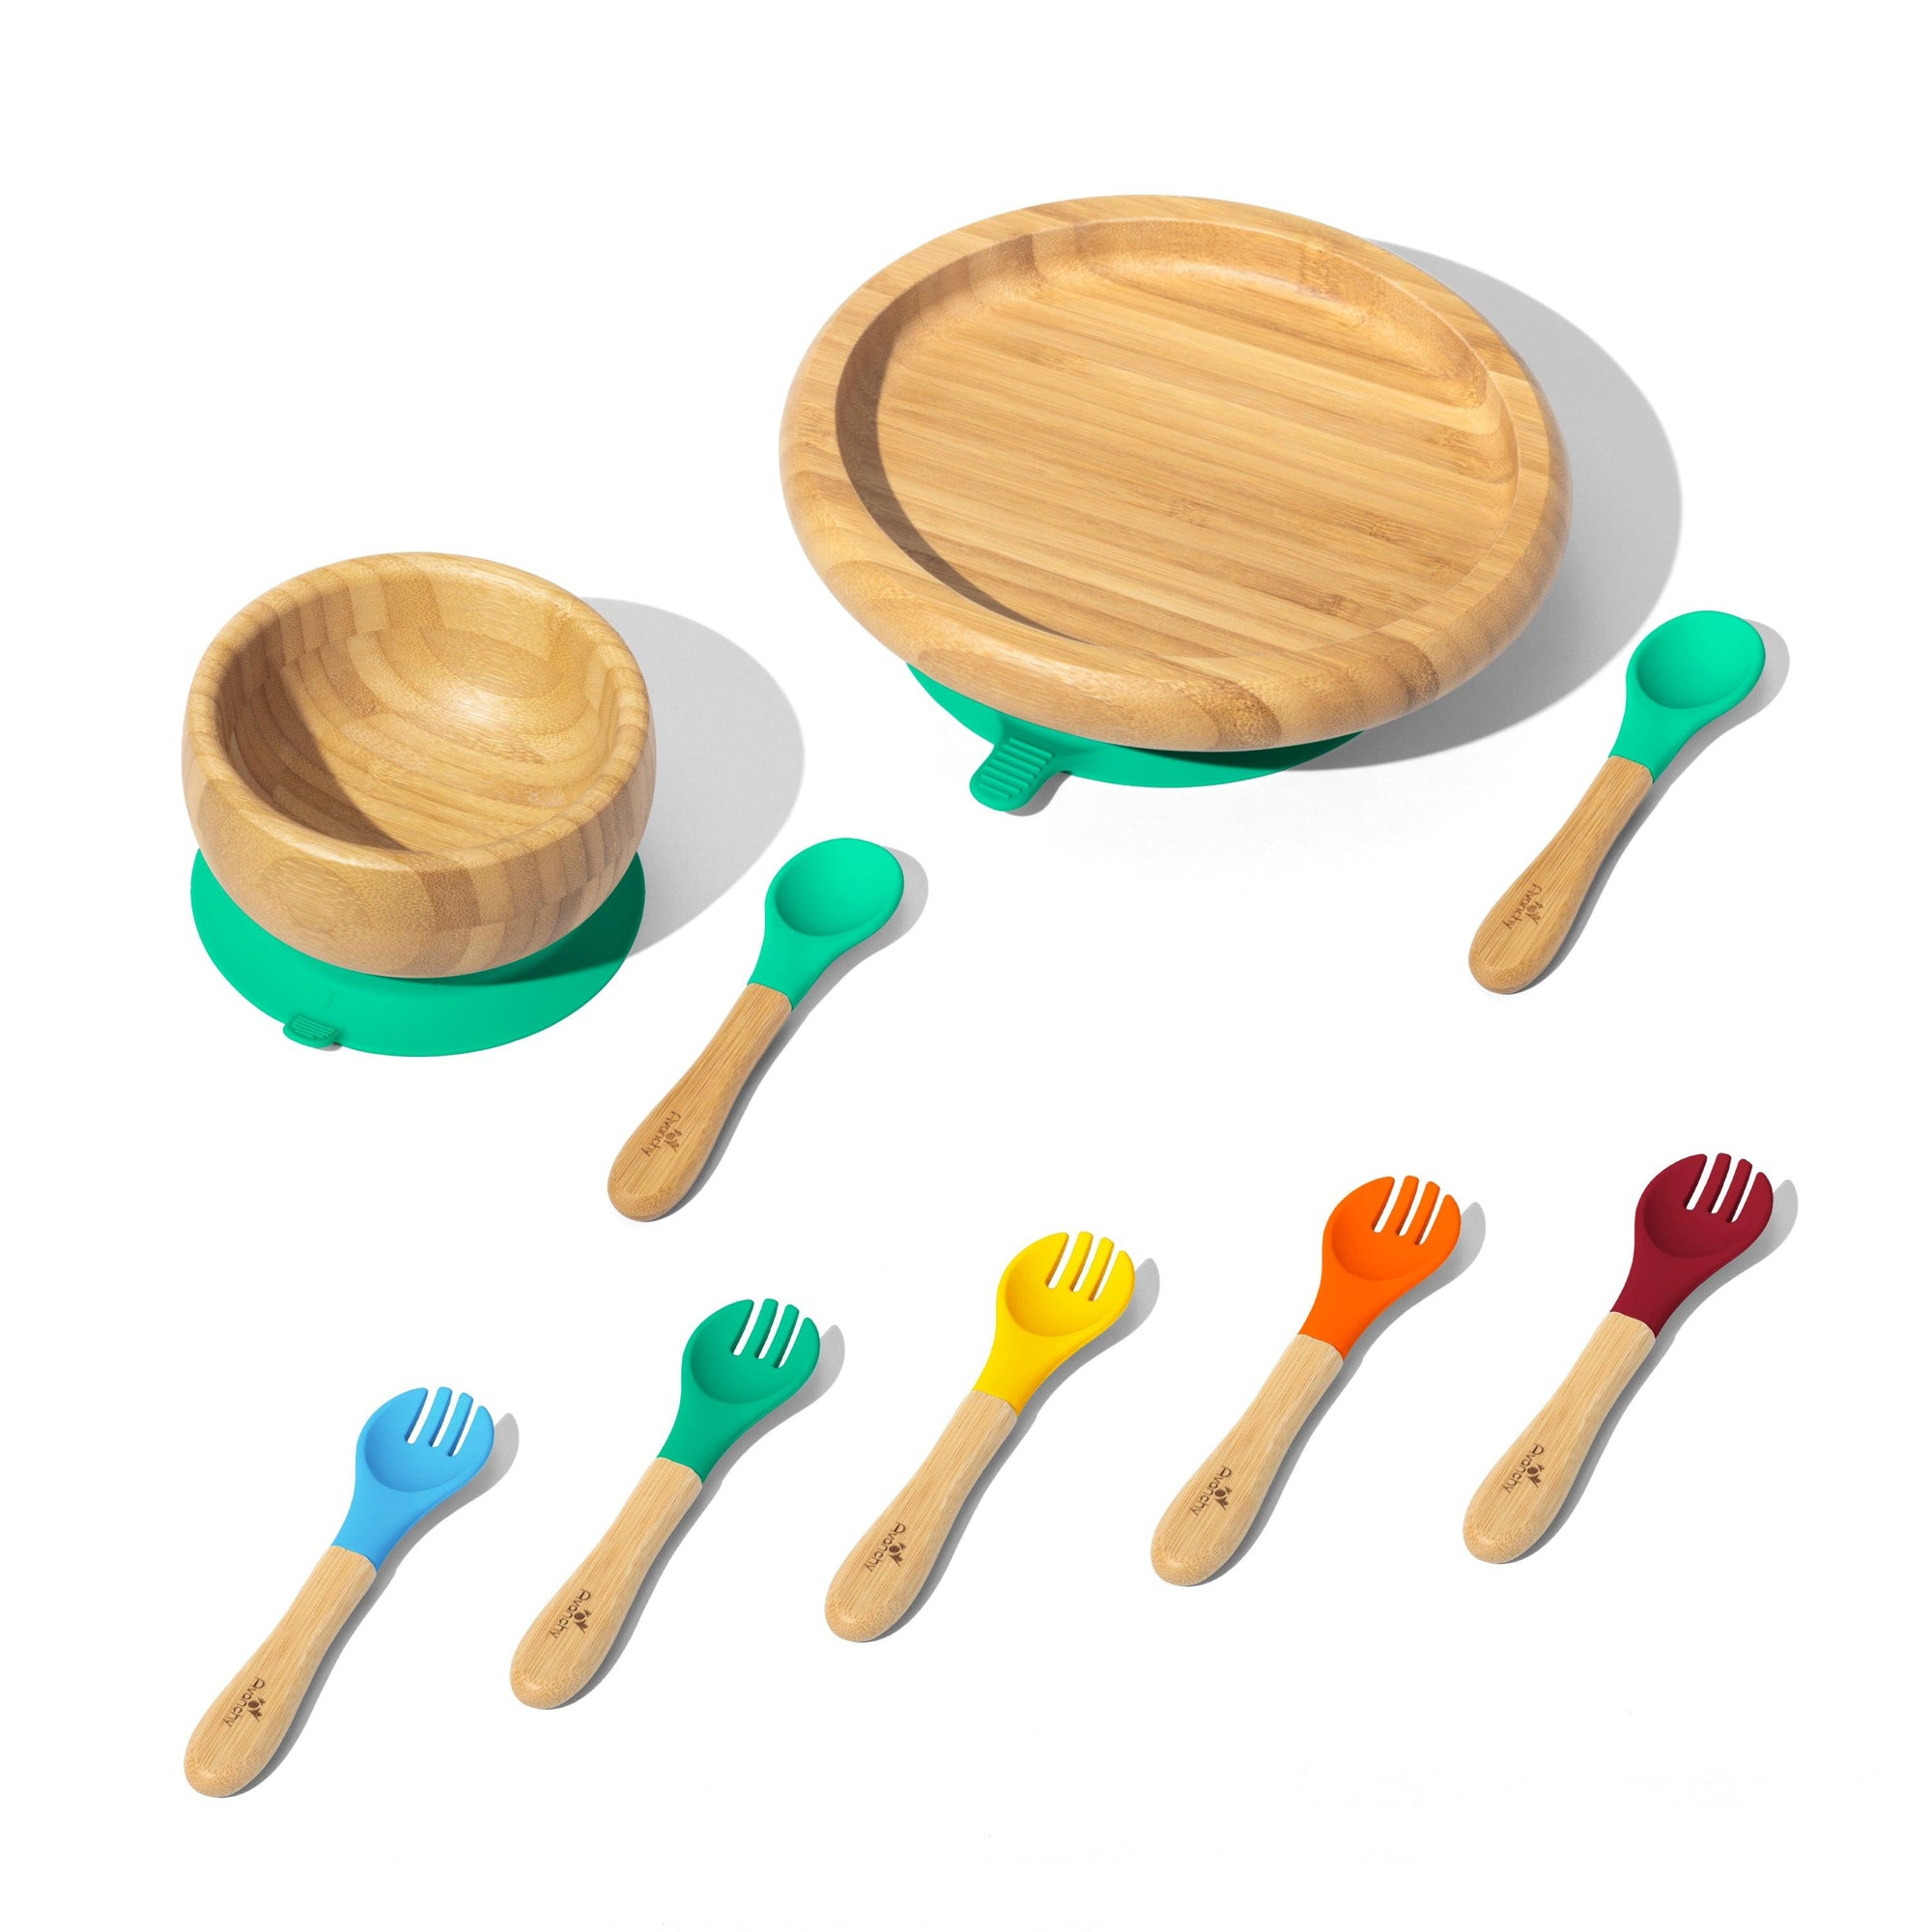 Build-A-Rainbow Gift Set - Avanchy Sustainable Baby Dishware